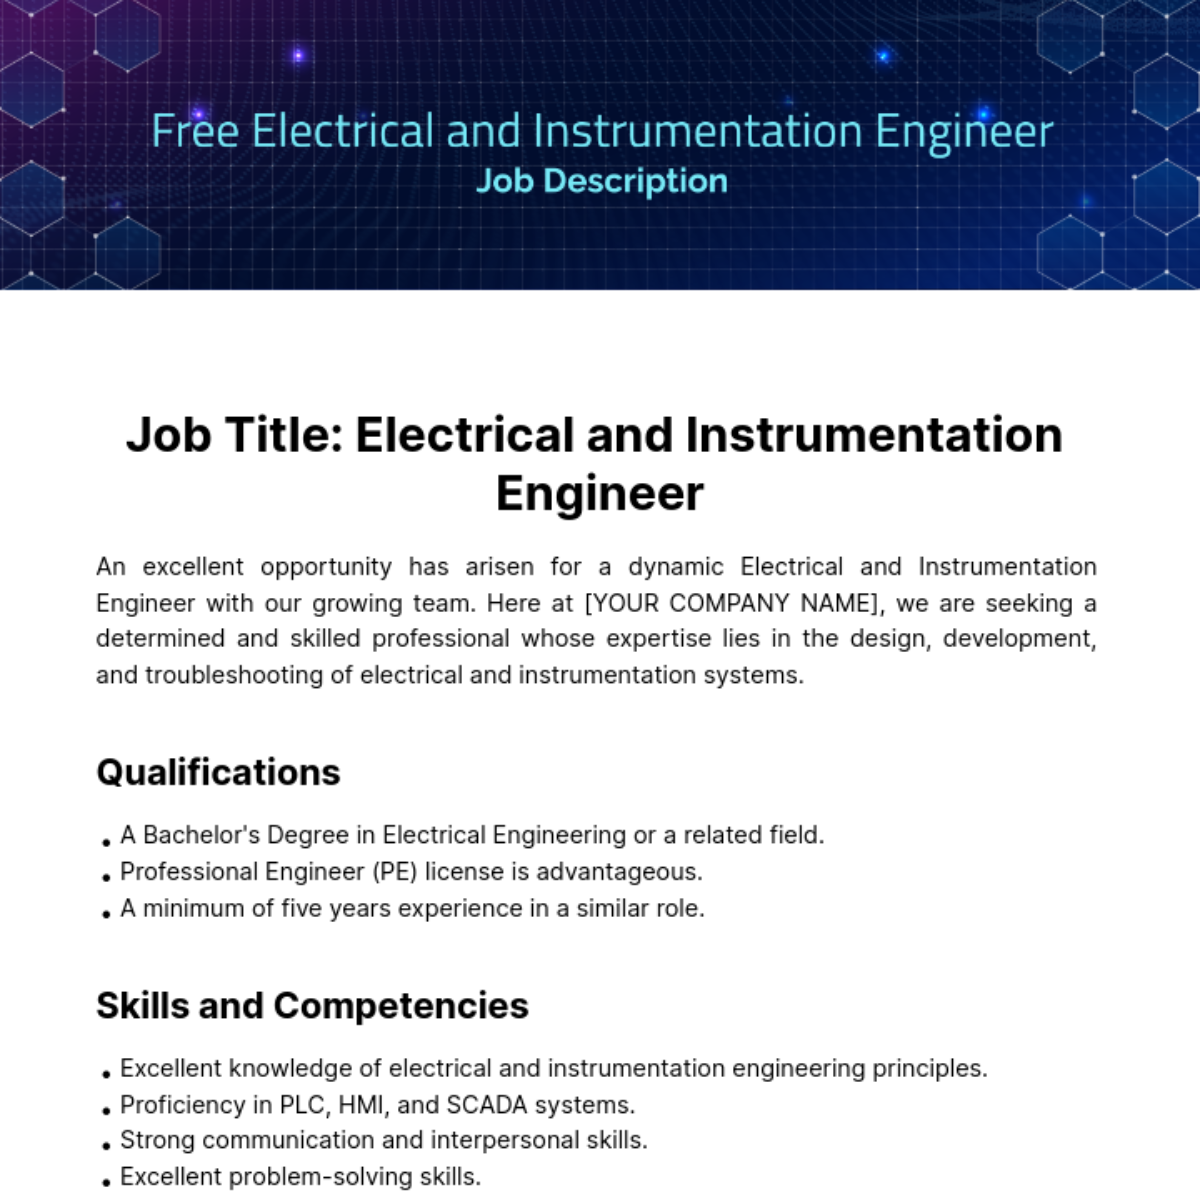 Free Electrical and Instrumentation Engineer Job Description Template